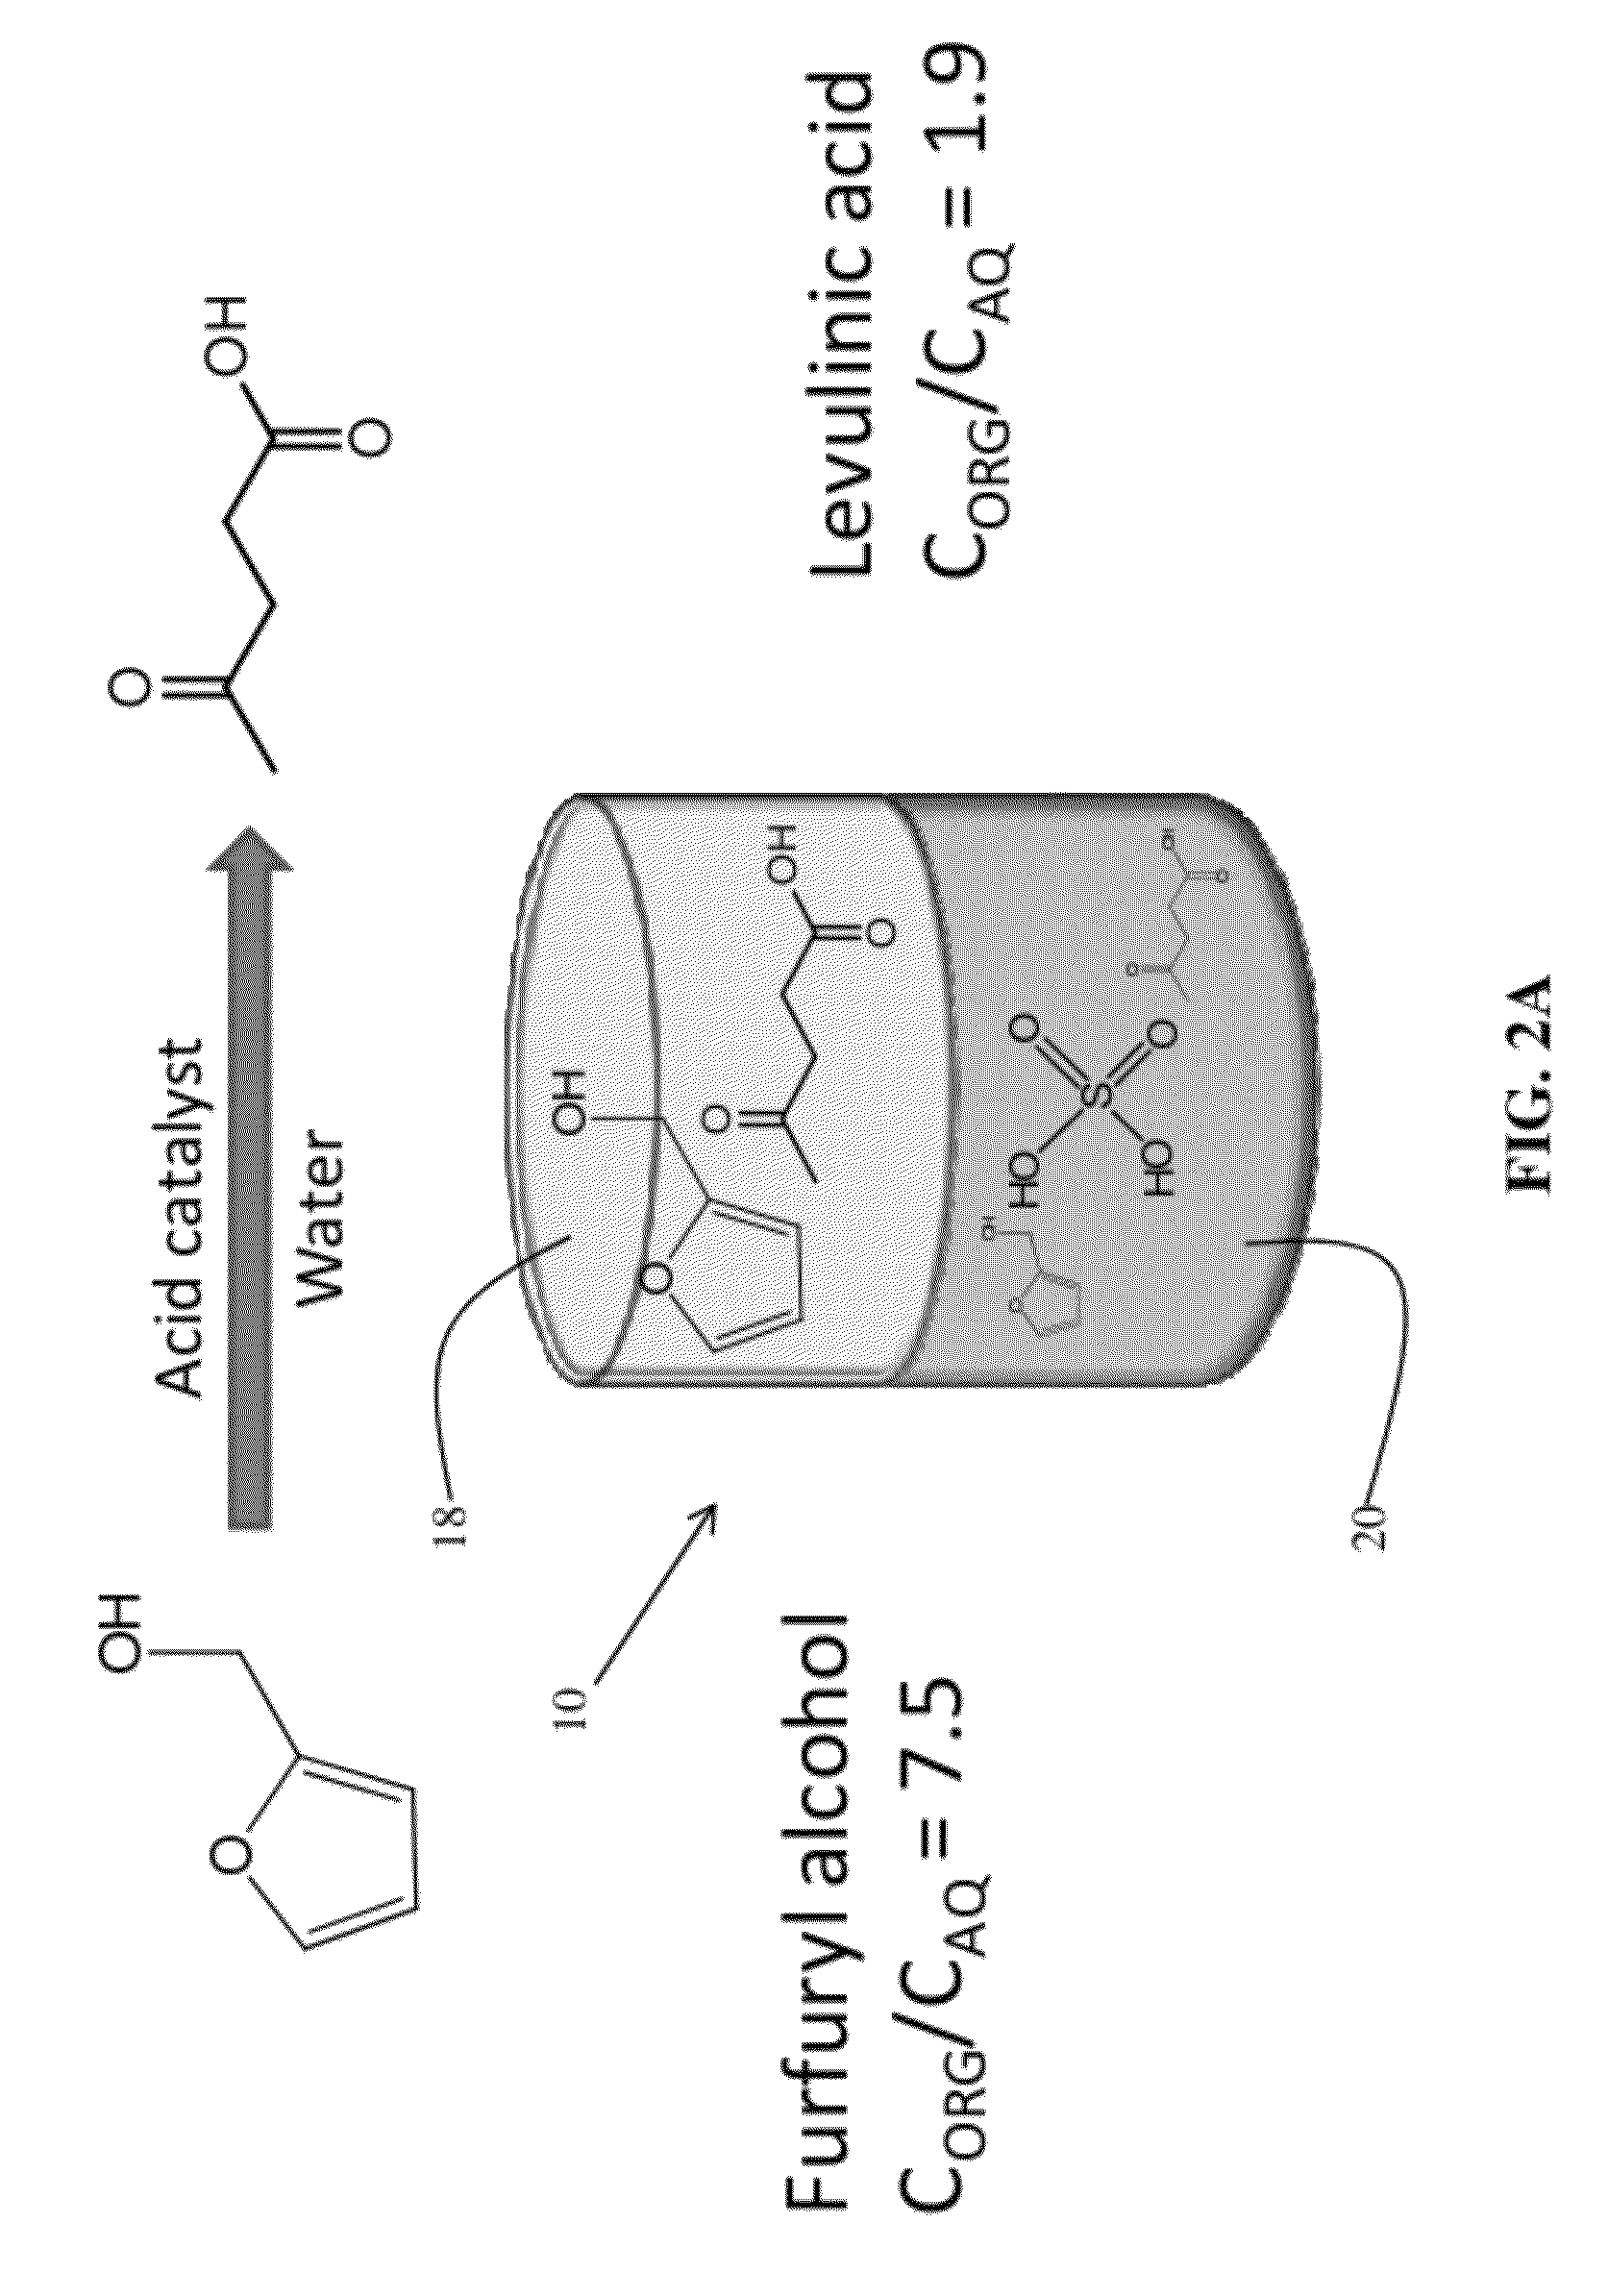 Method to produce, recover and convert furan derivatives from aqueous solutions using alkylphenol extraction